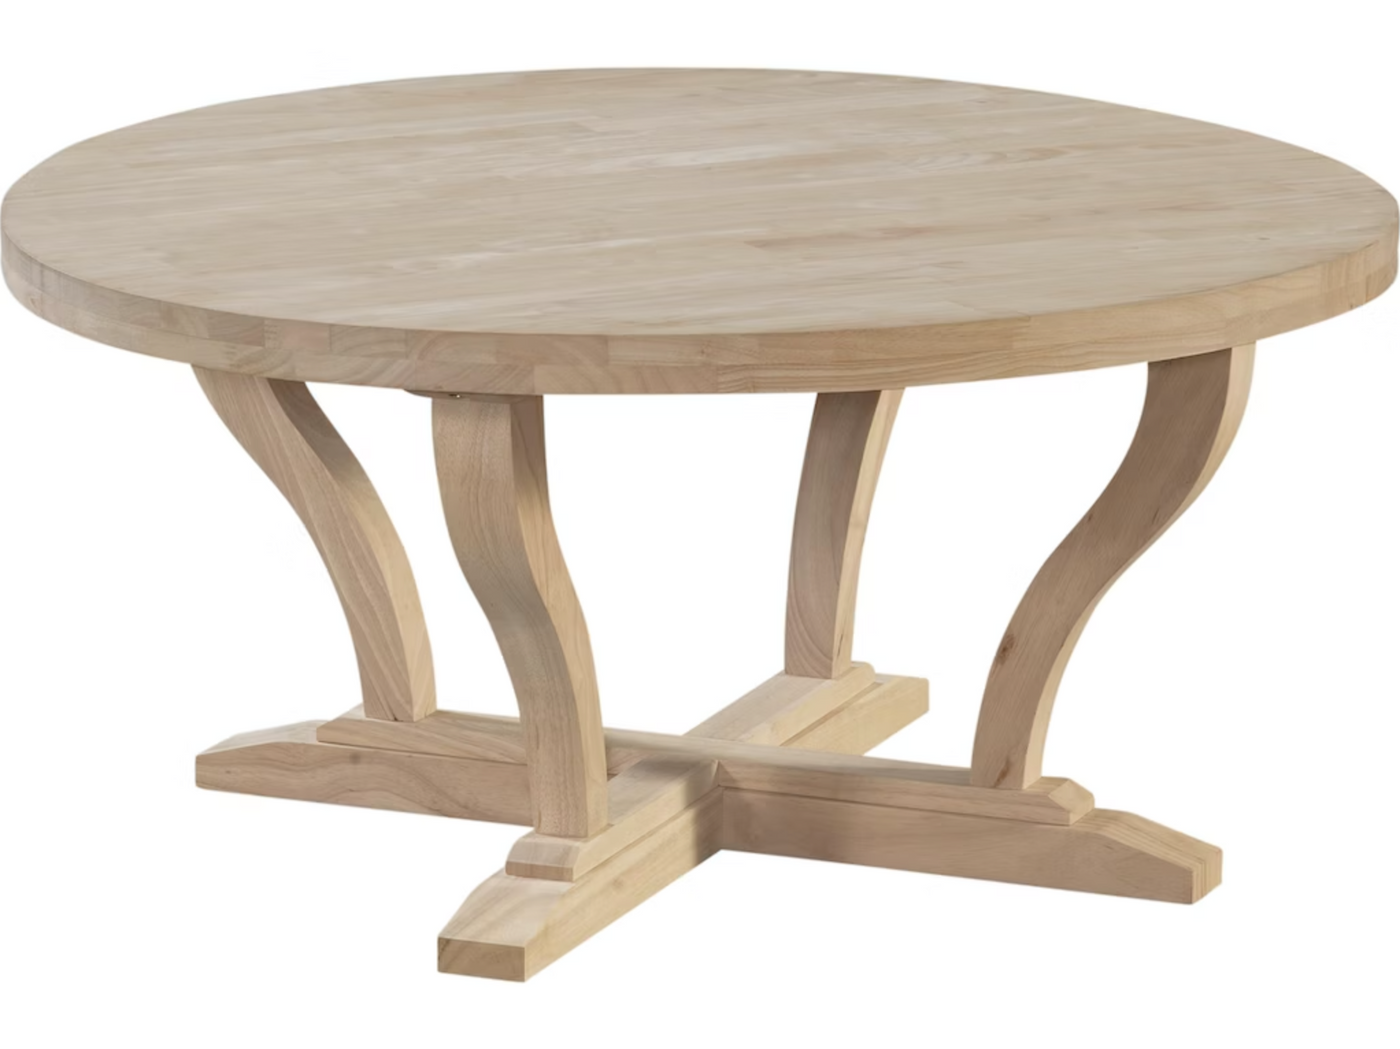 The Round Merlot Coffee Table